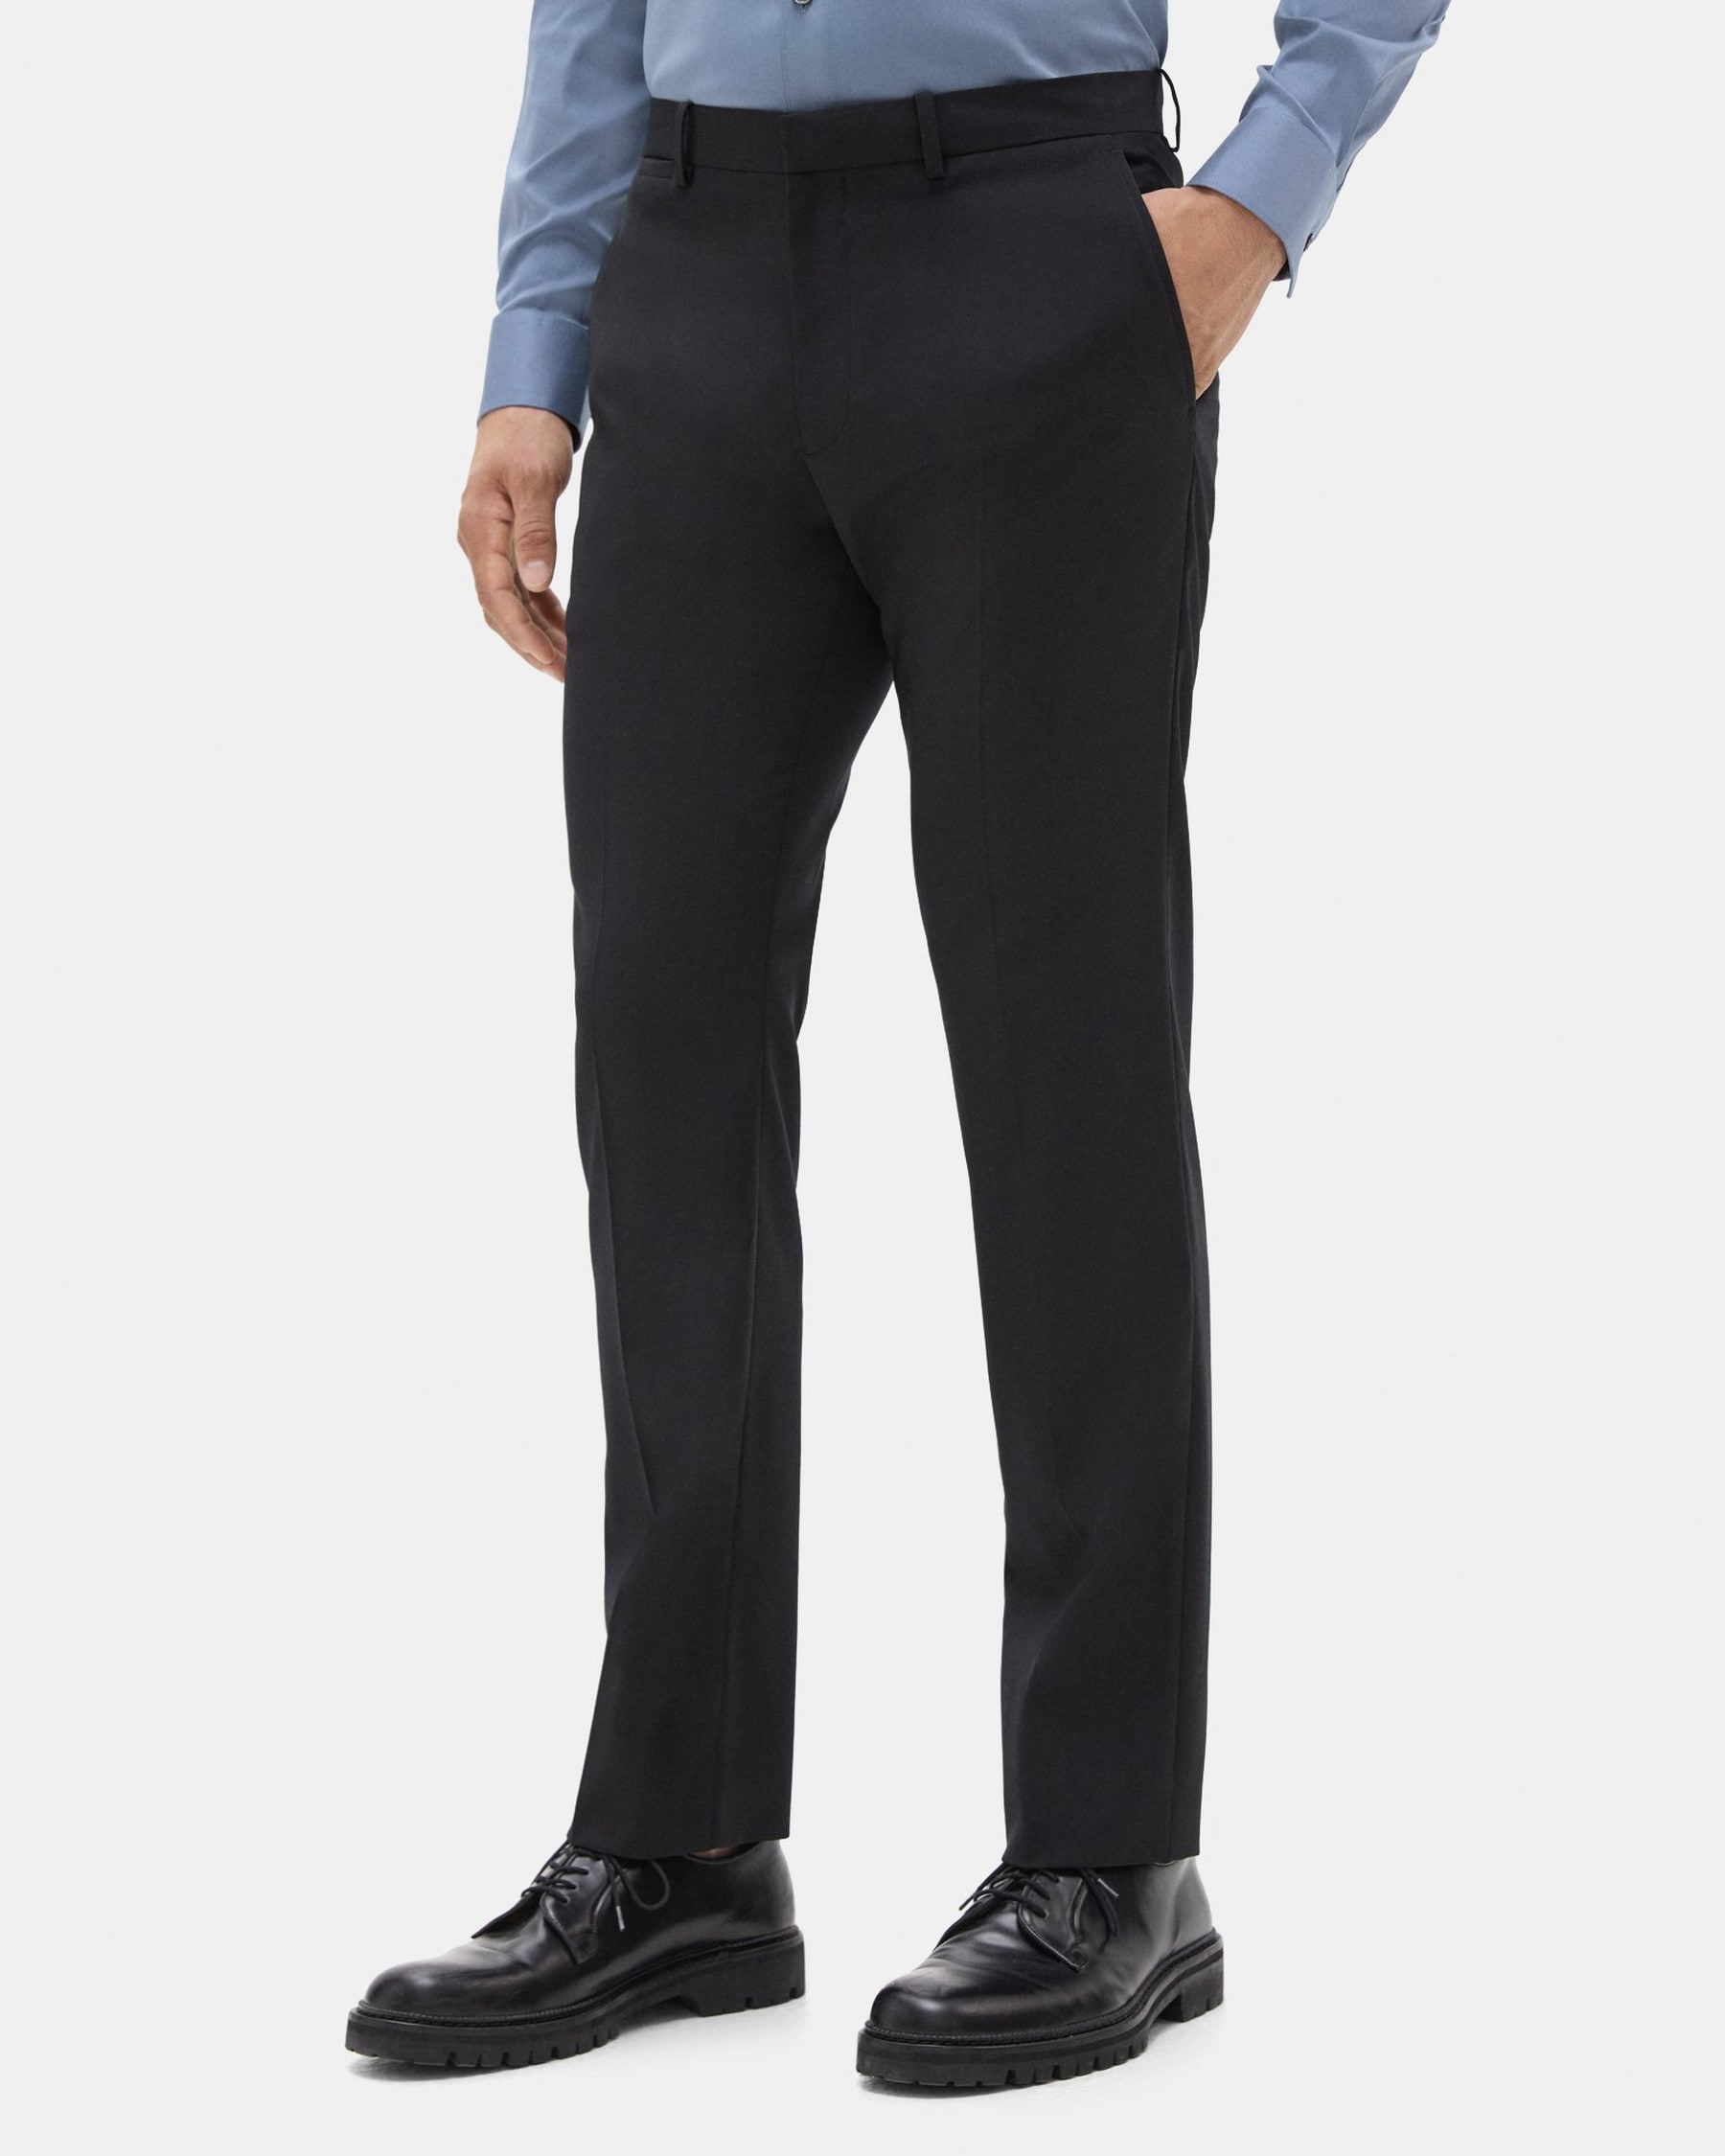 Straight-Fit Suit Pant in Sartorial Suiting